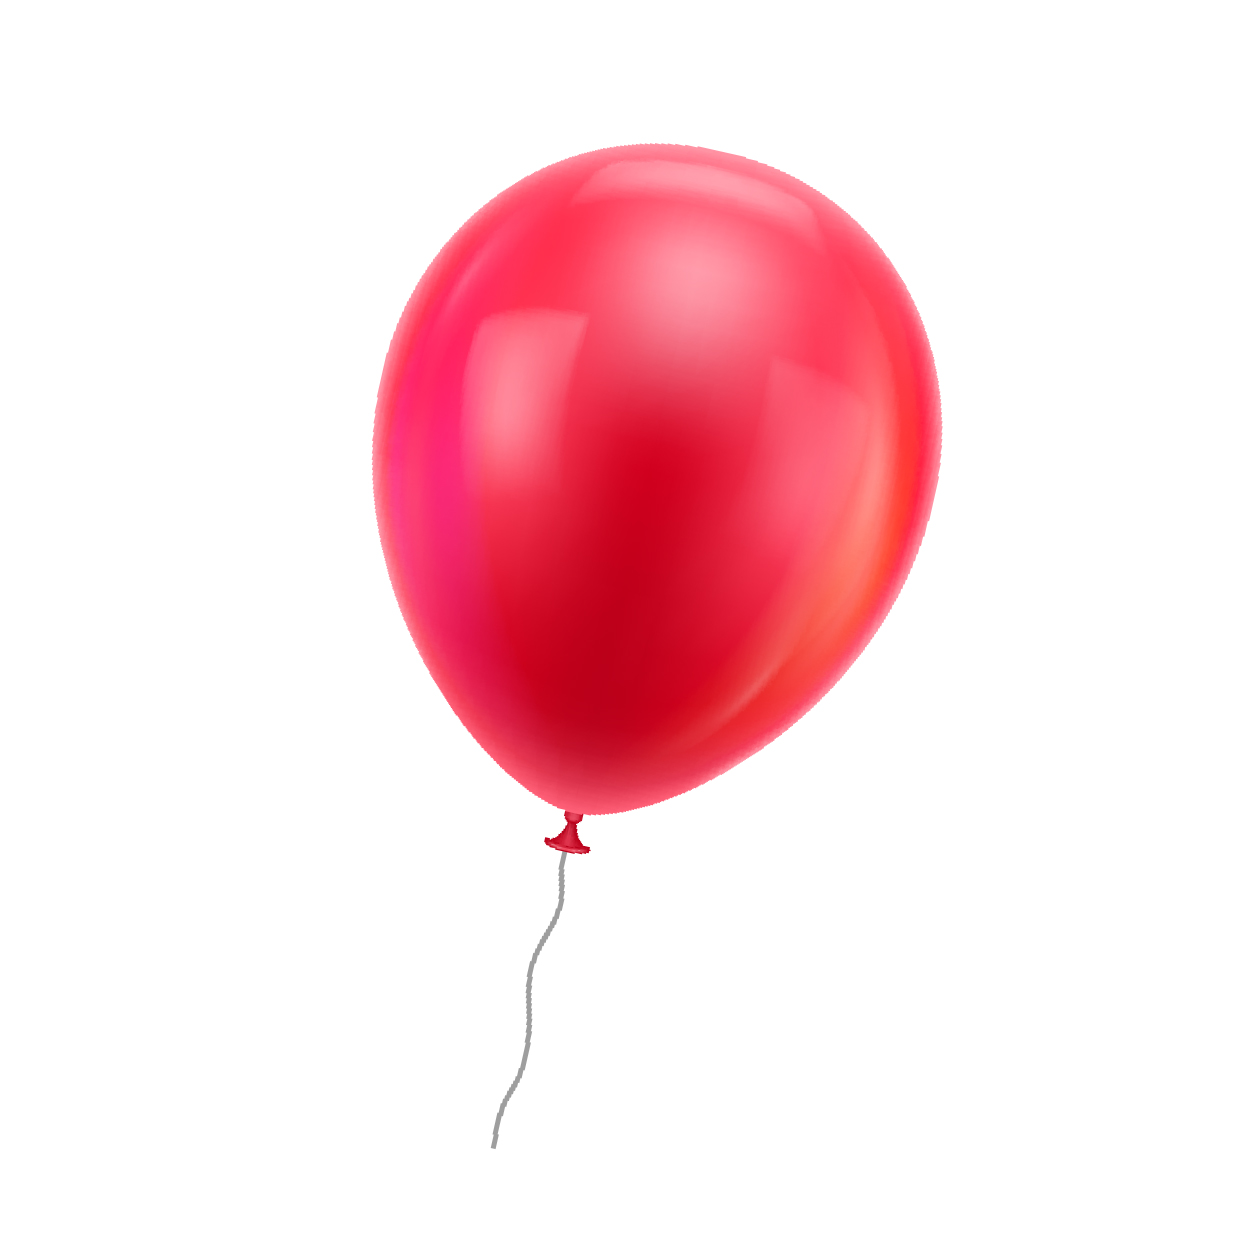 RED BALLOON - sent on October 7th, 2022